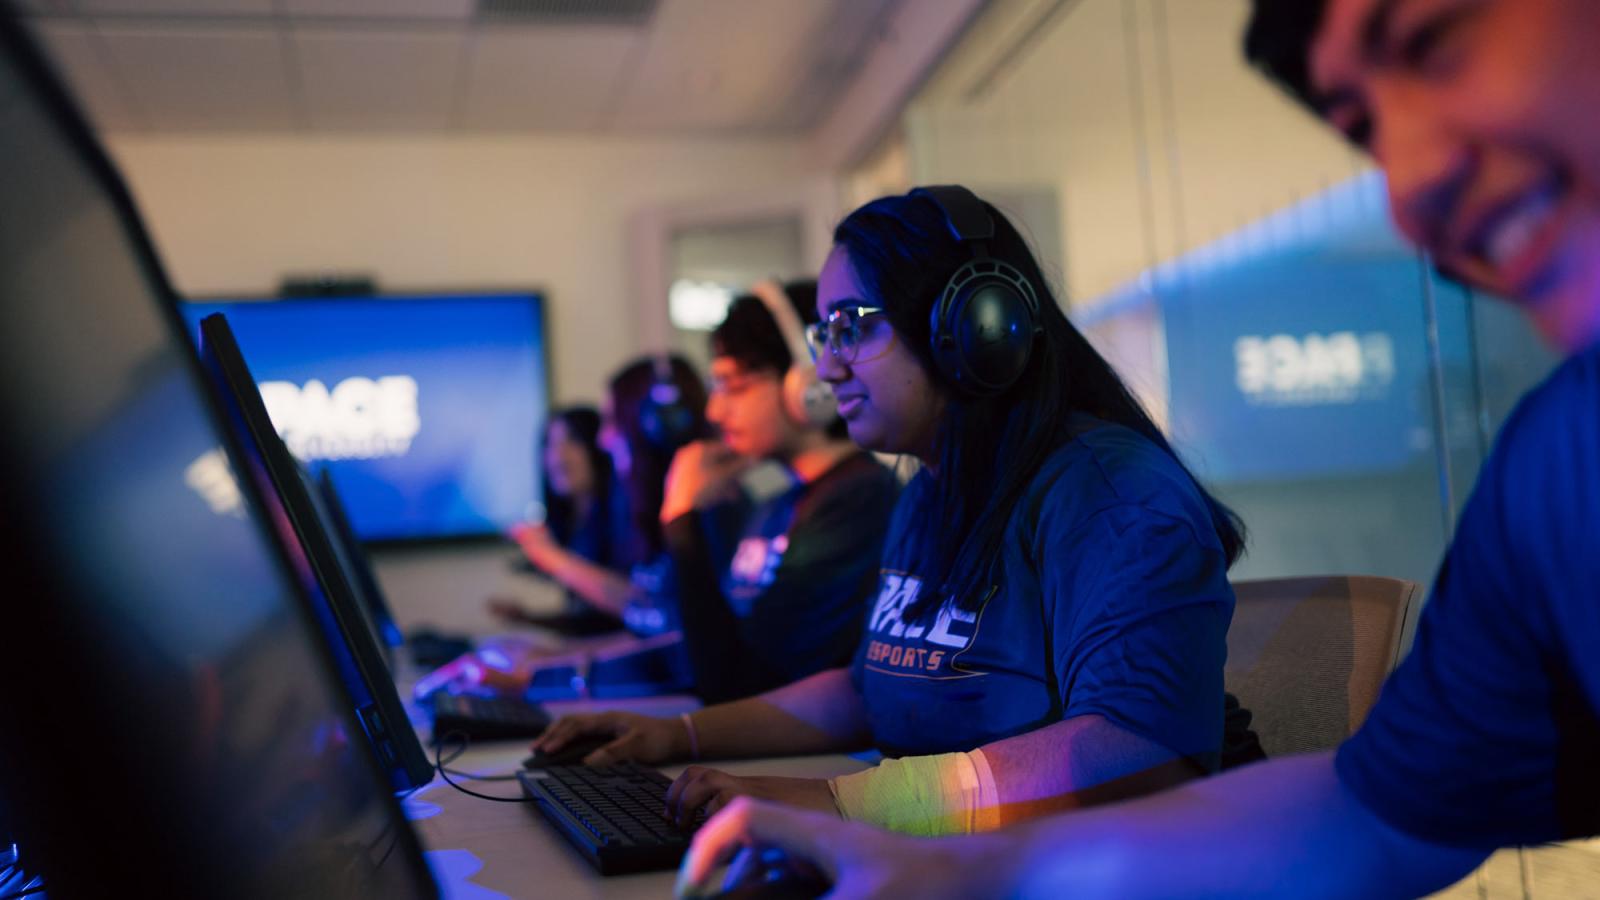 Pace university students competing for the Pace esports team